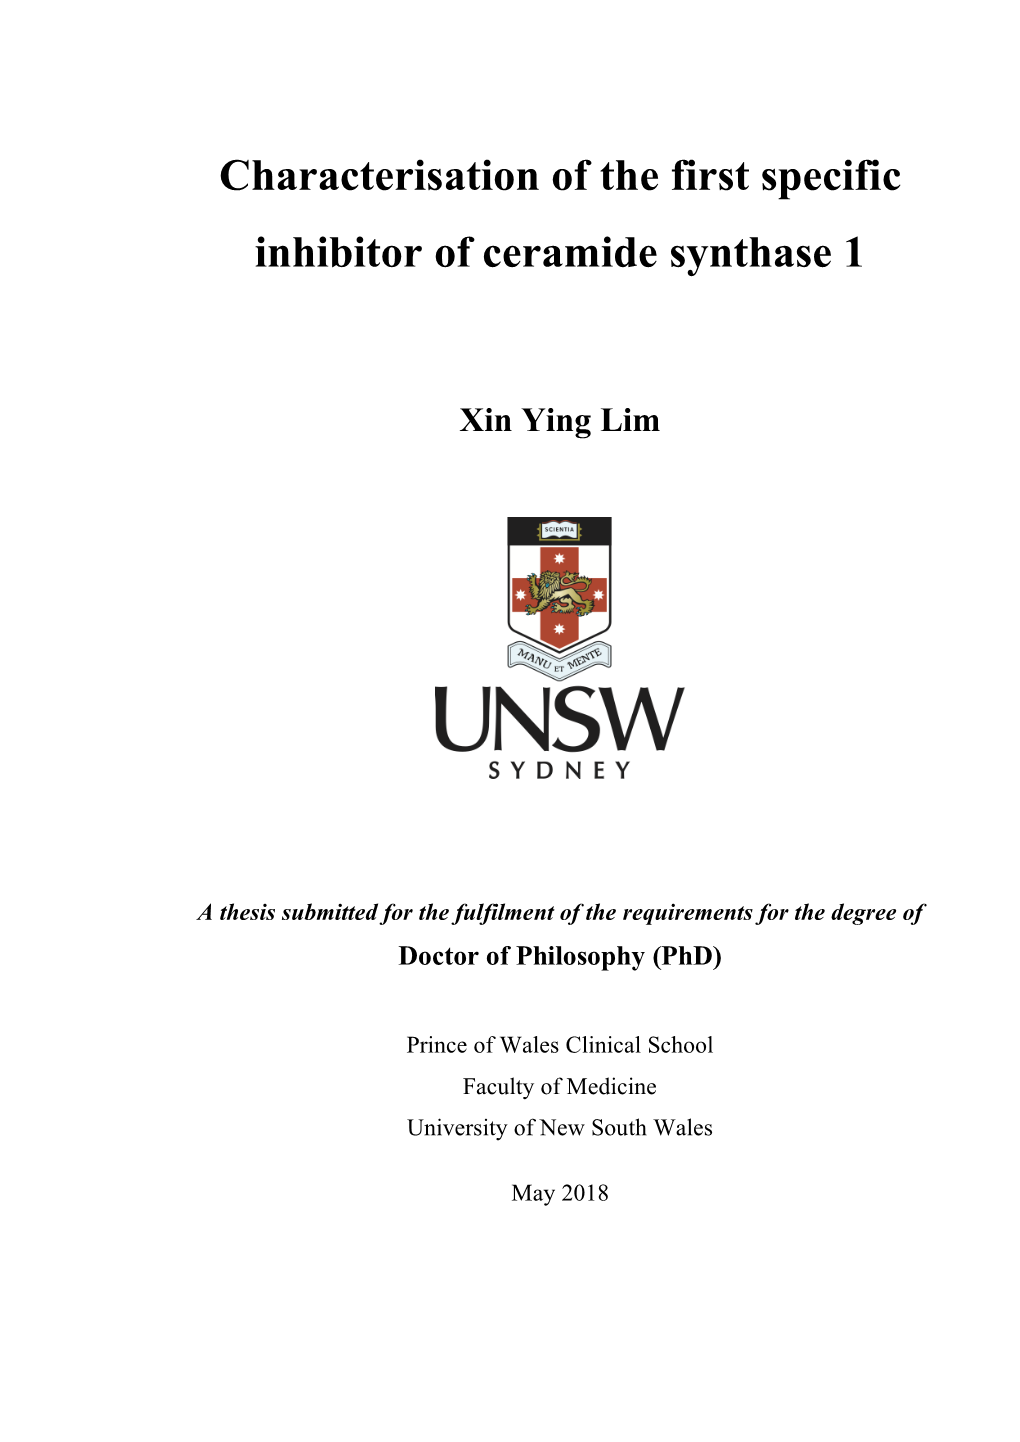 Characterisation of the First Specific Inhibitor of Ceramide Synthase 1